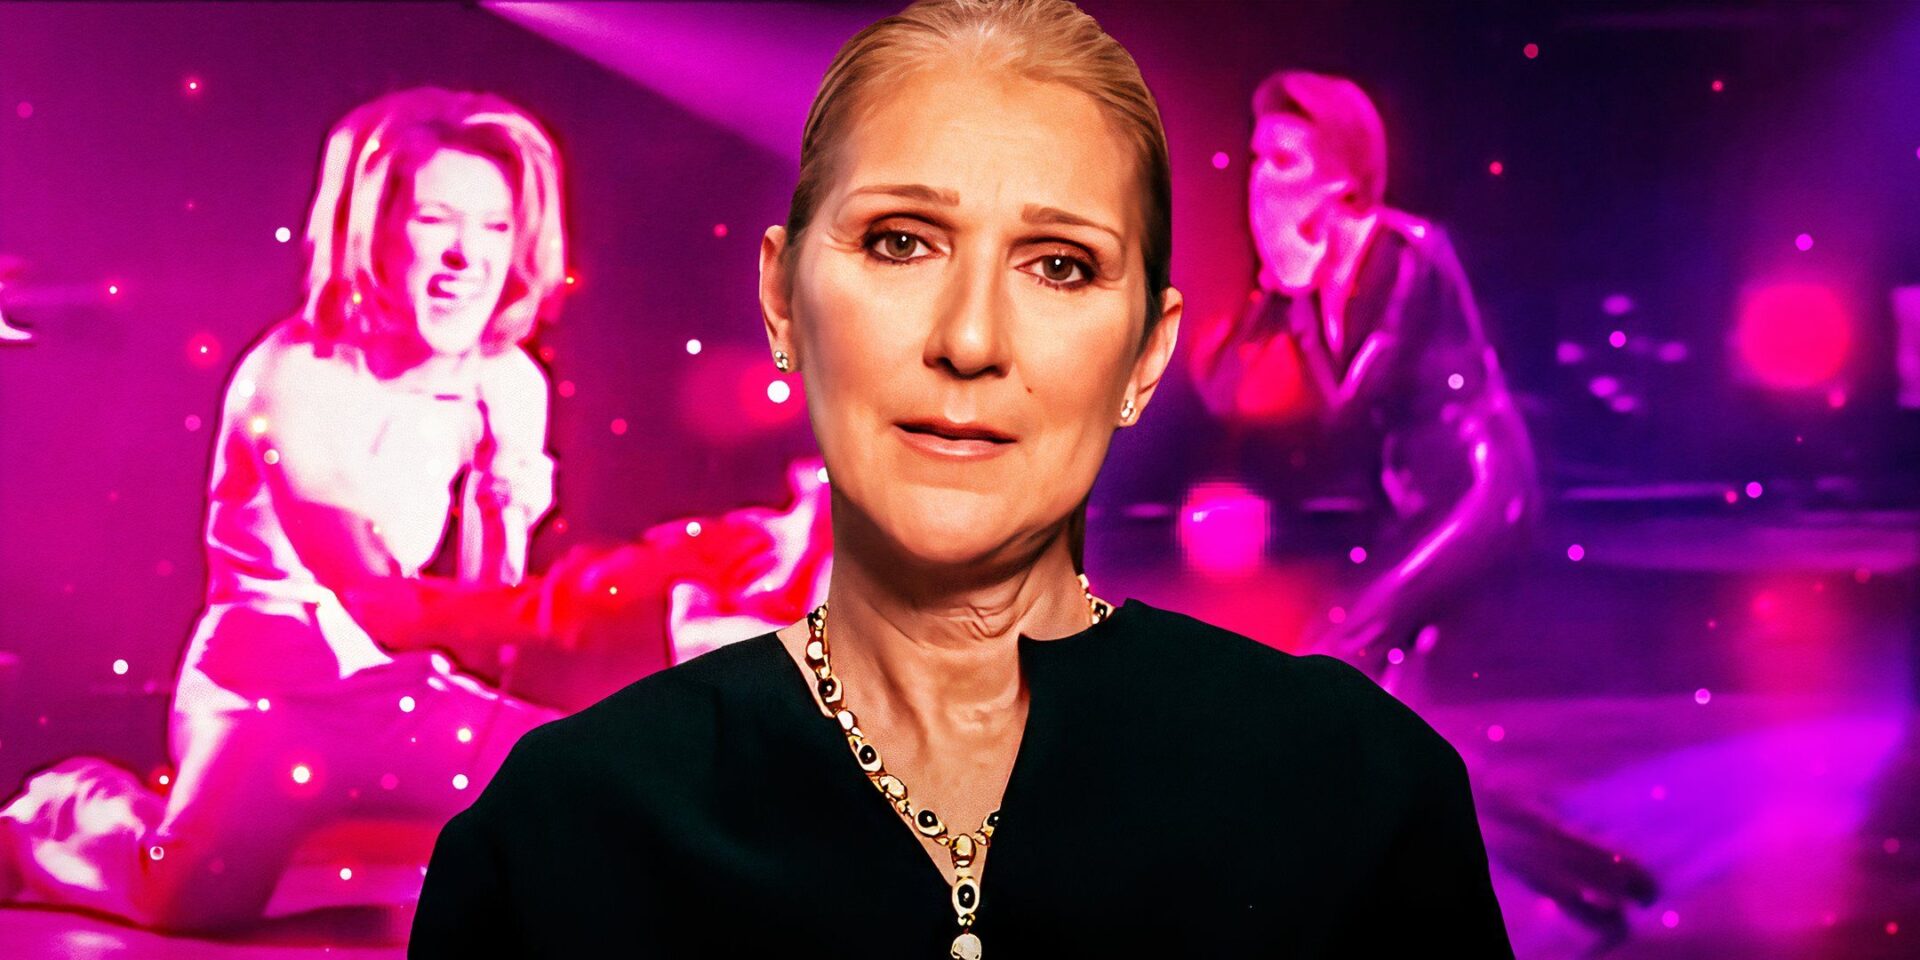 10 Biggest Reveals About Celine Dion From Her New Documentary